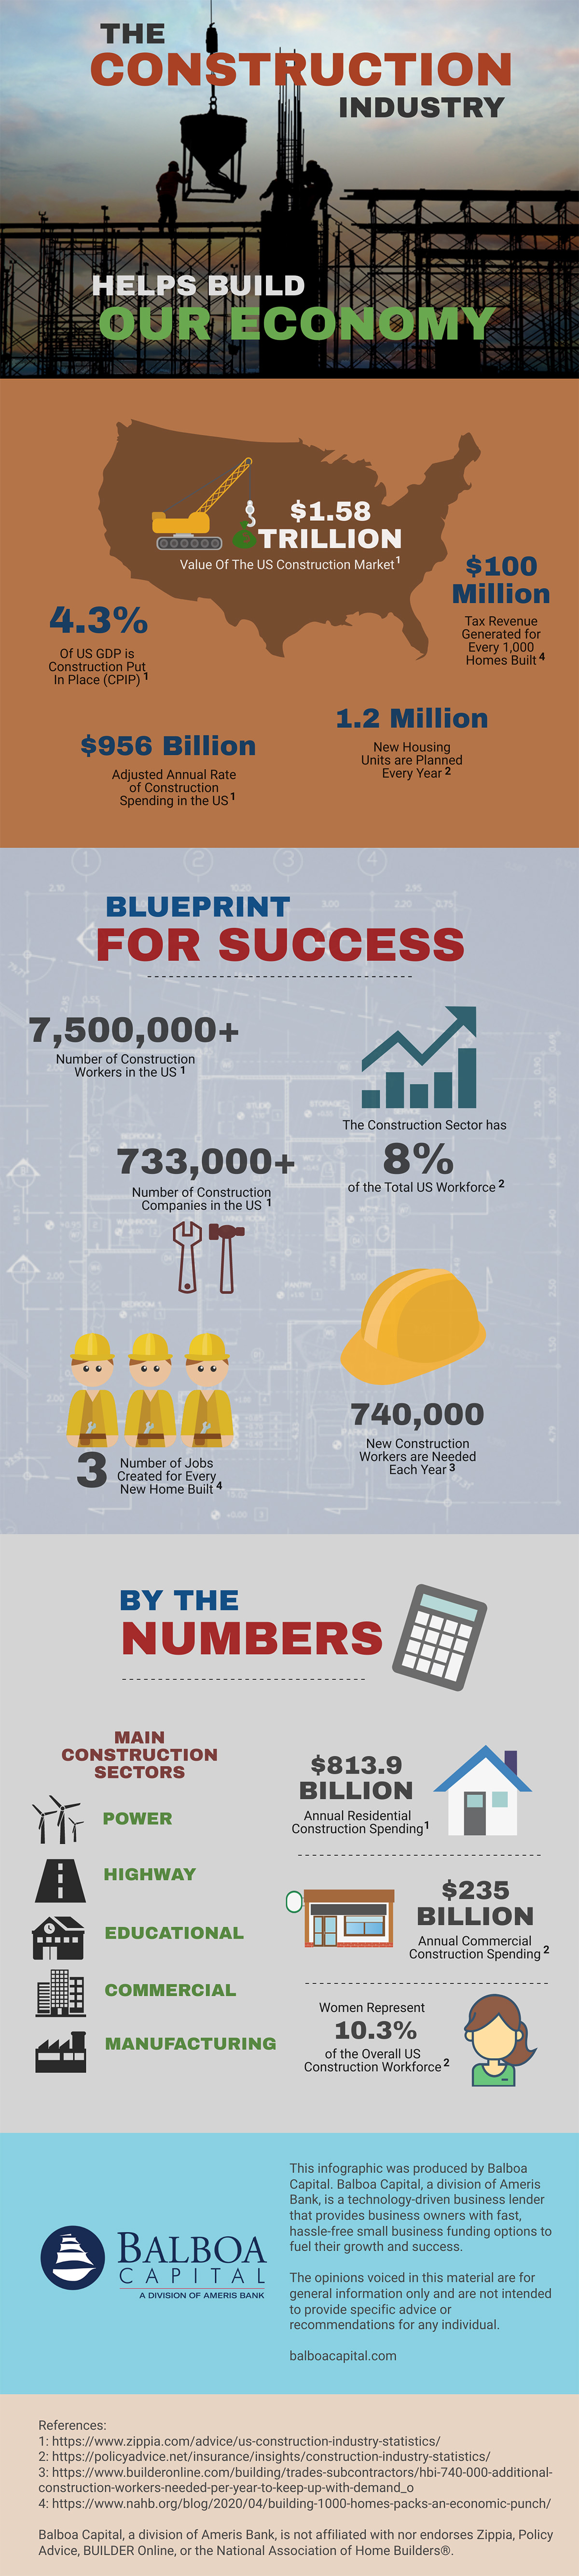 Construction Industry Infographic